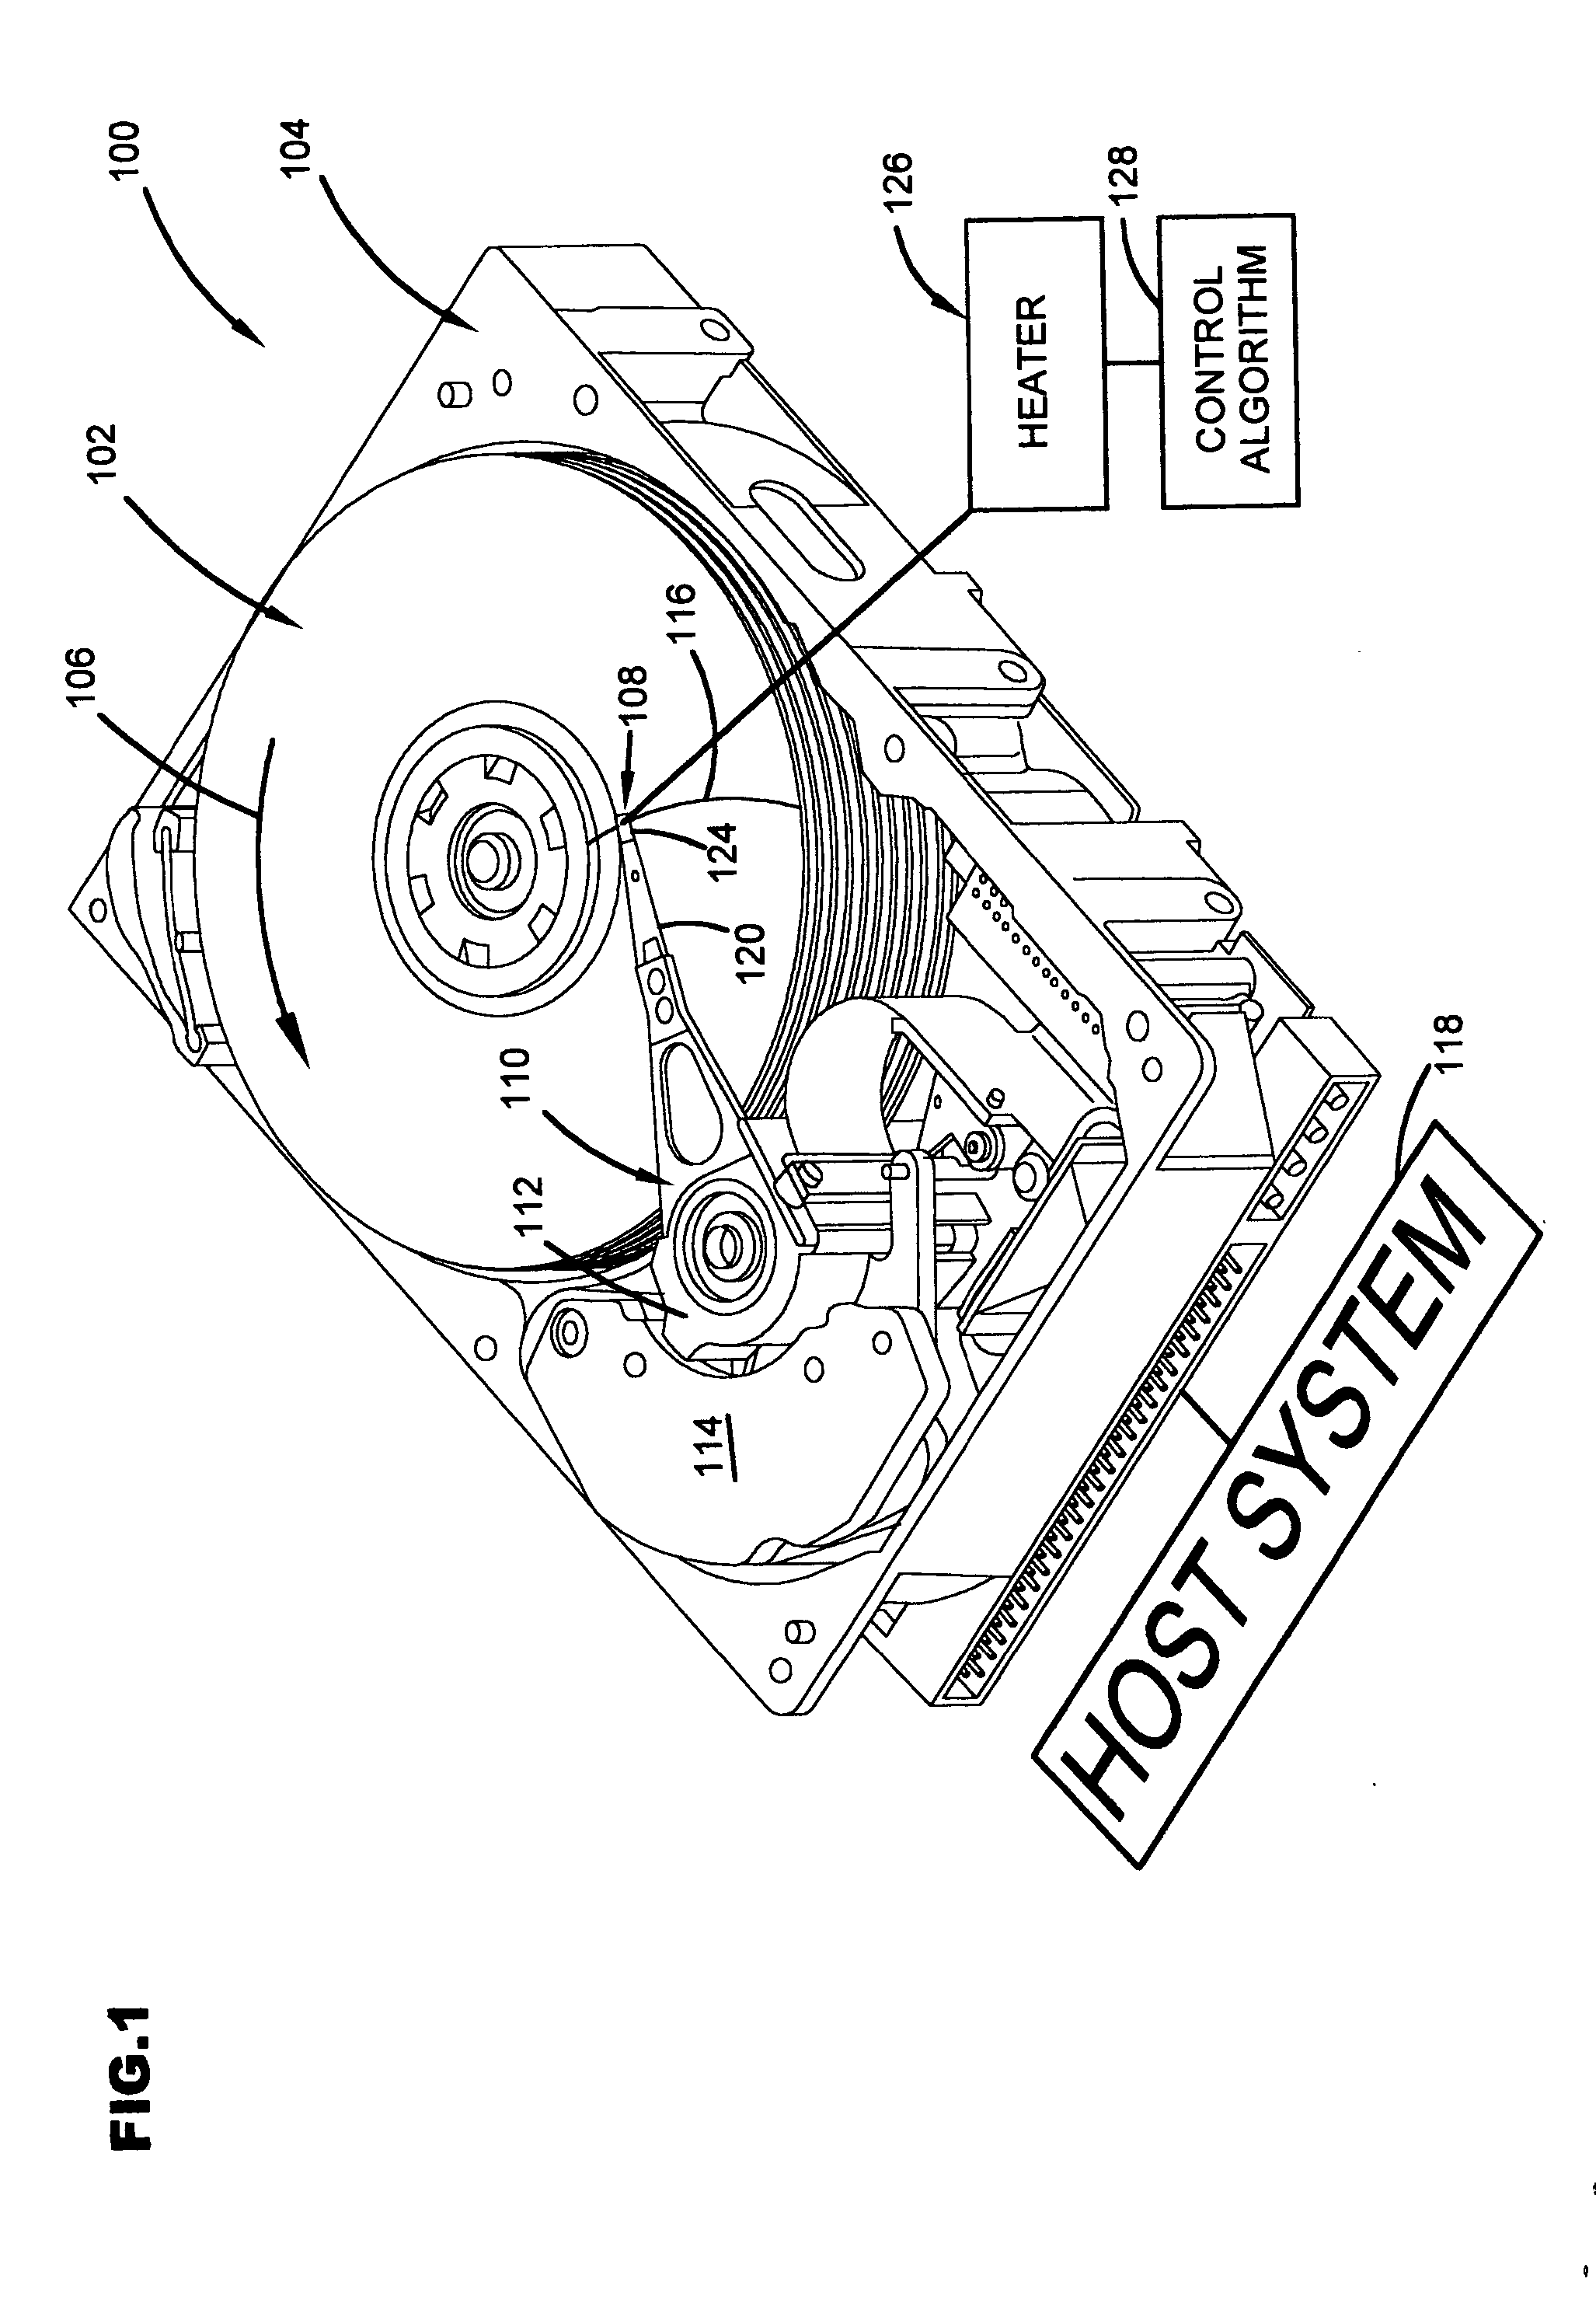 Head with heating element and control regime therefor